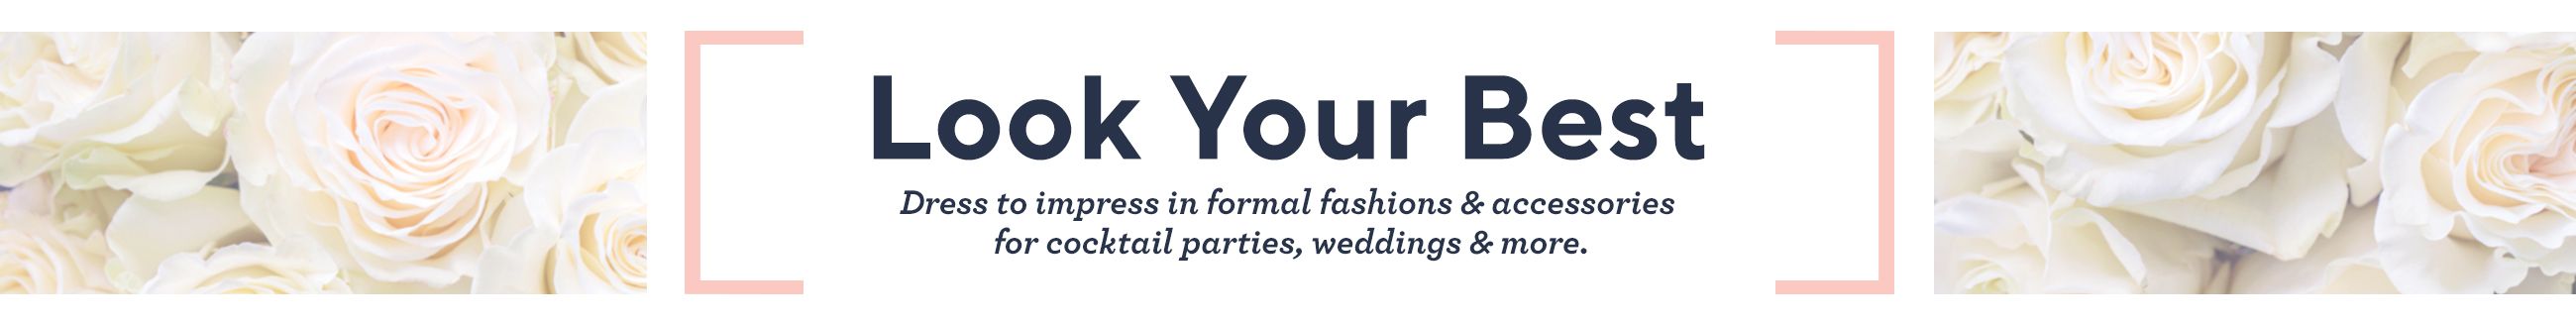 Look Your Best Dress to impress in formal fashions & accessories for cocktail parties, weddings & more